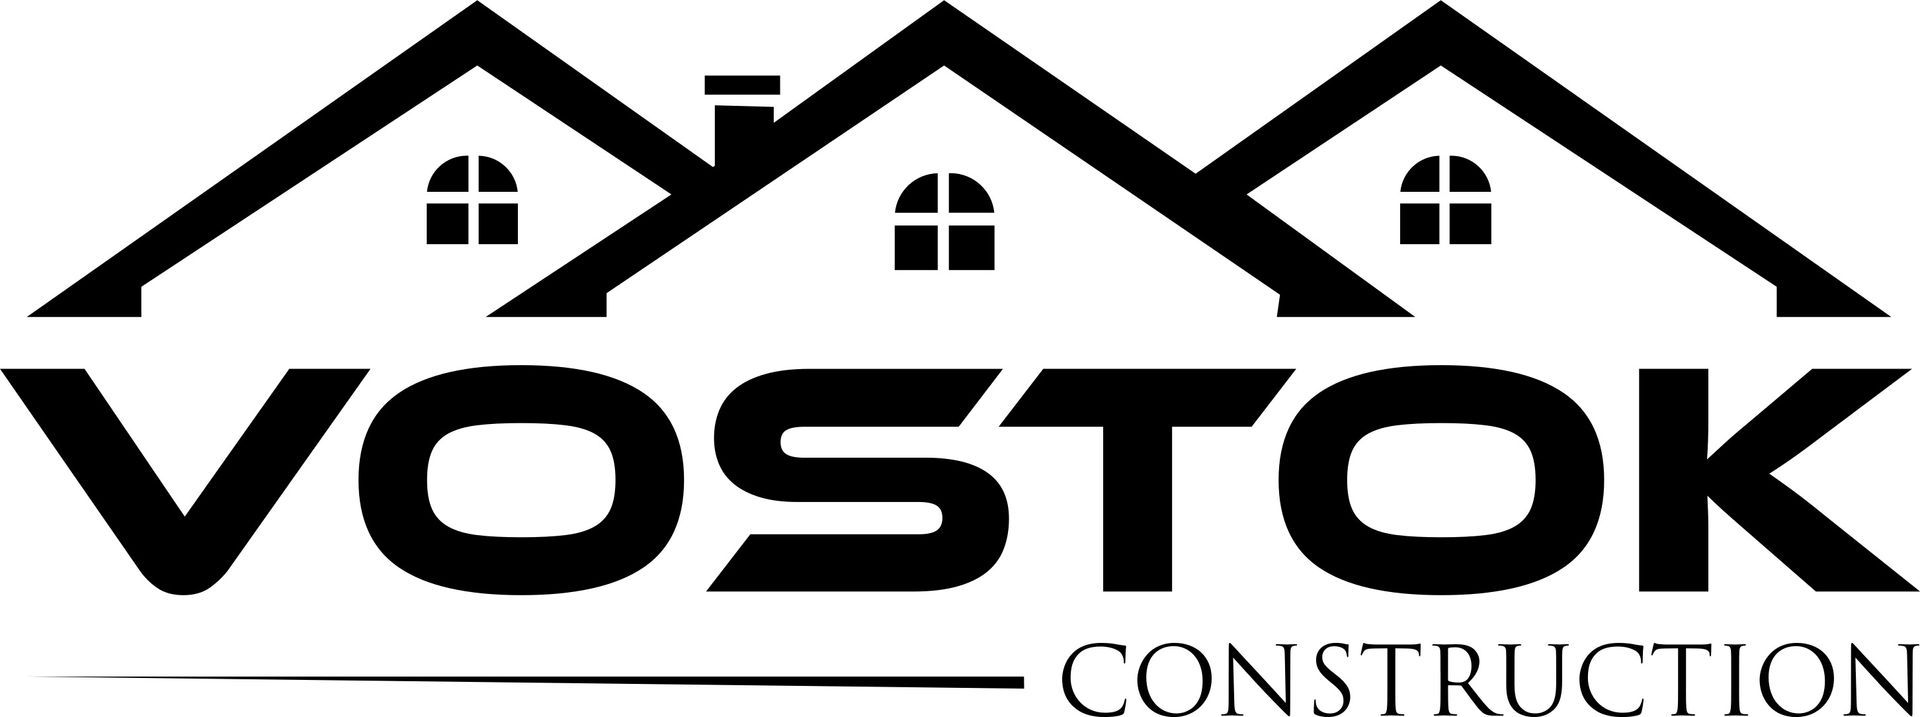 A black and white logo for a construction company called vostok construction.